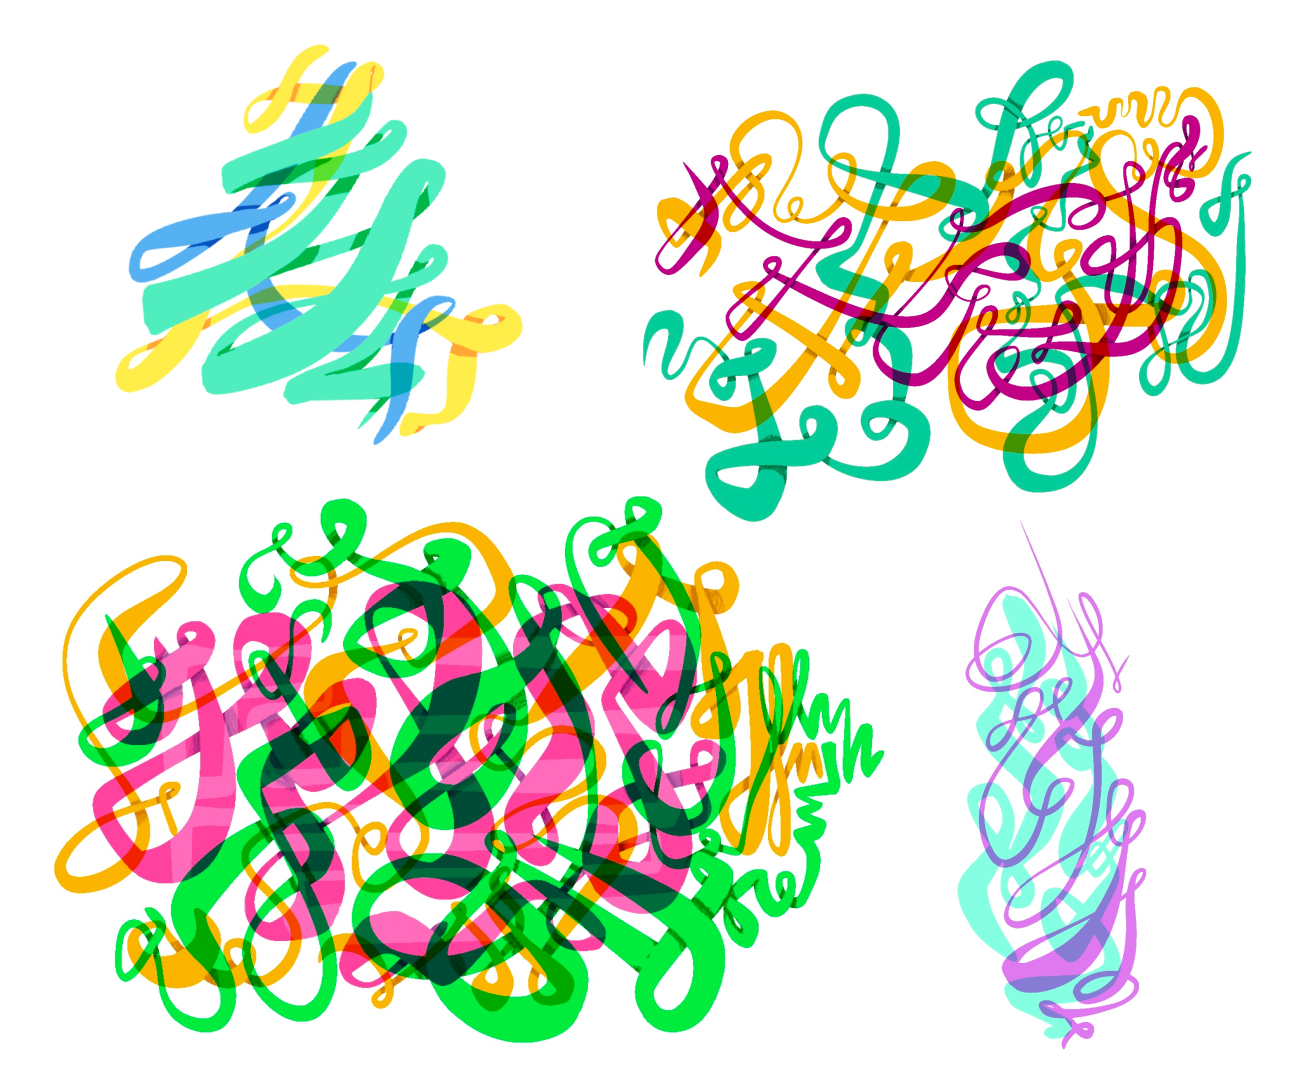 many tangled ribbons following a closer form to resemble some pattern in their mess